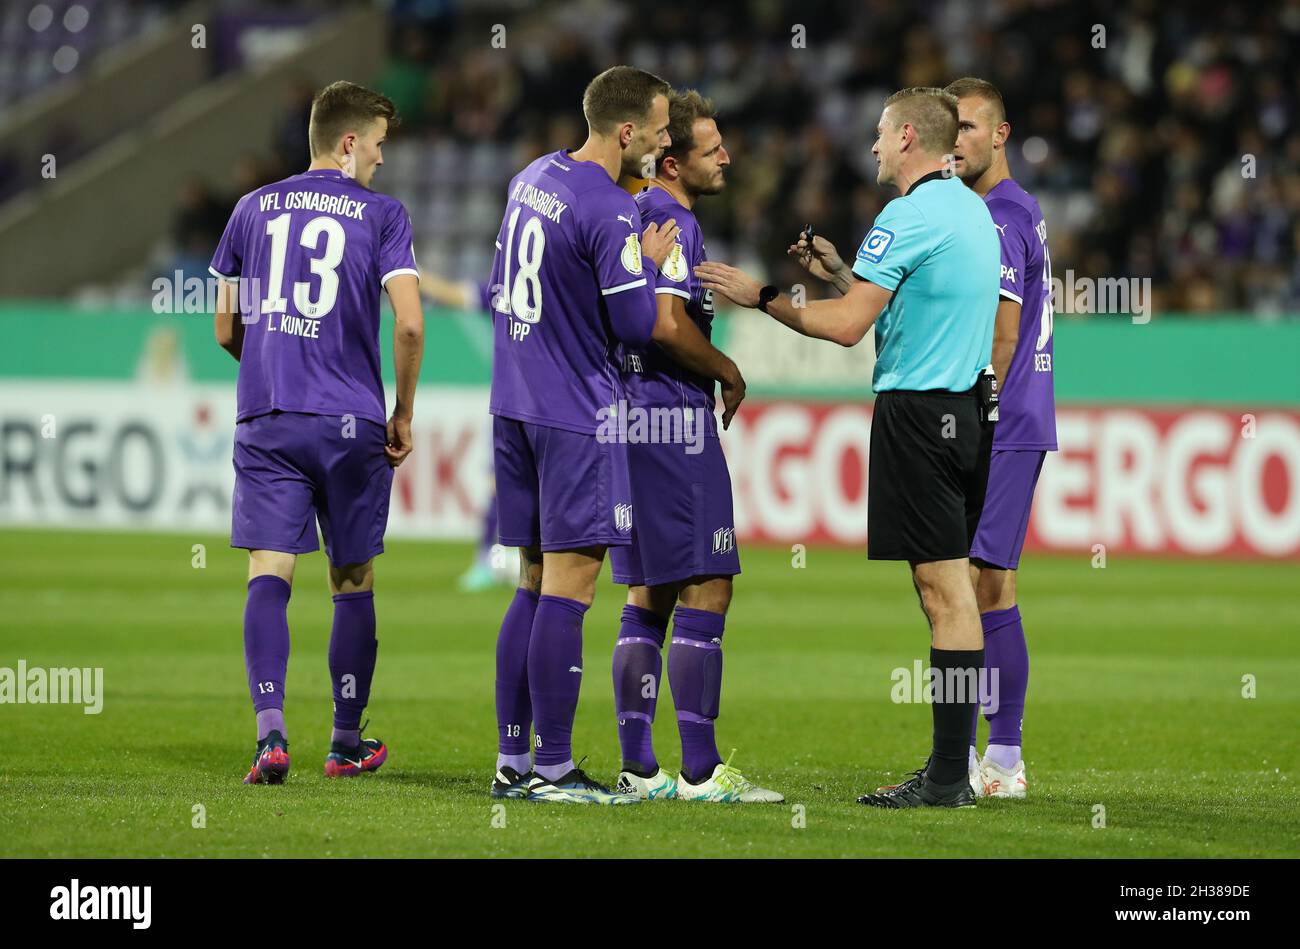 Page 446 - The Referee High Resolution Stock Photography and Images - Alamy